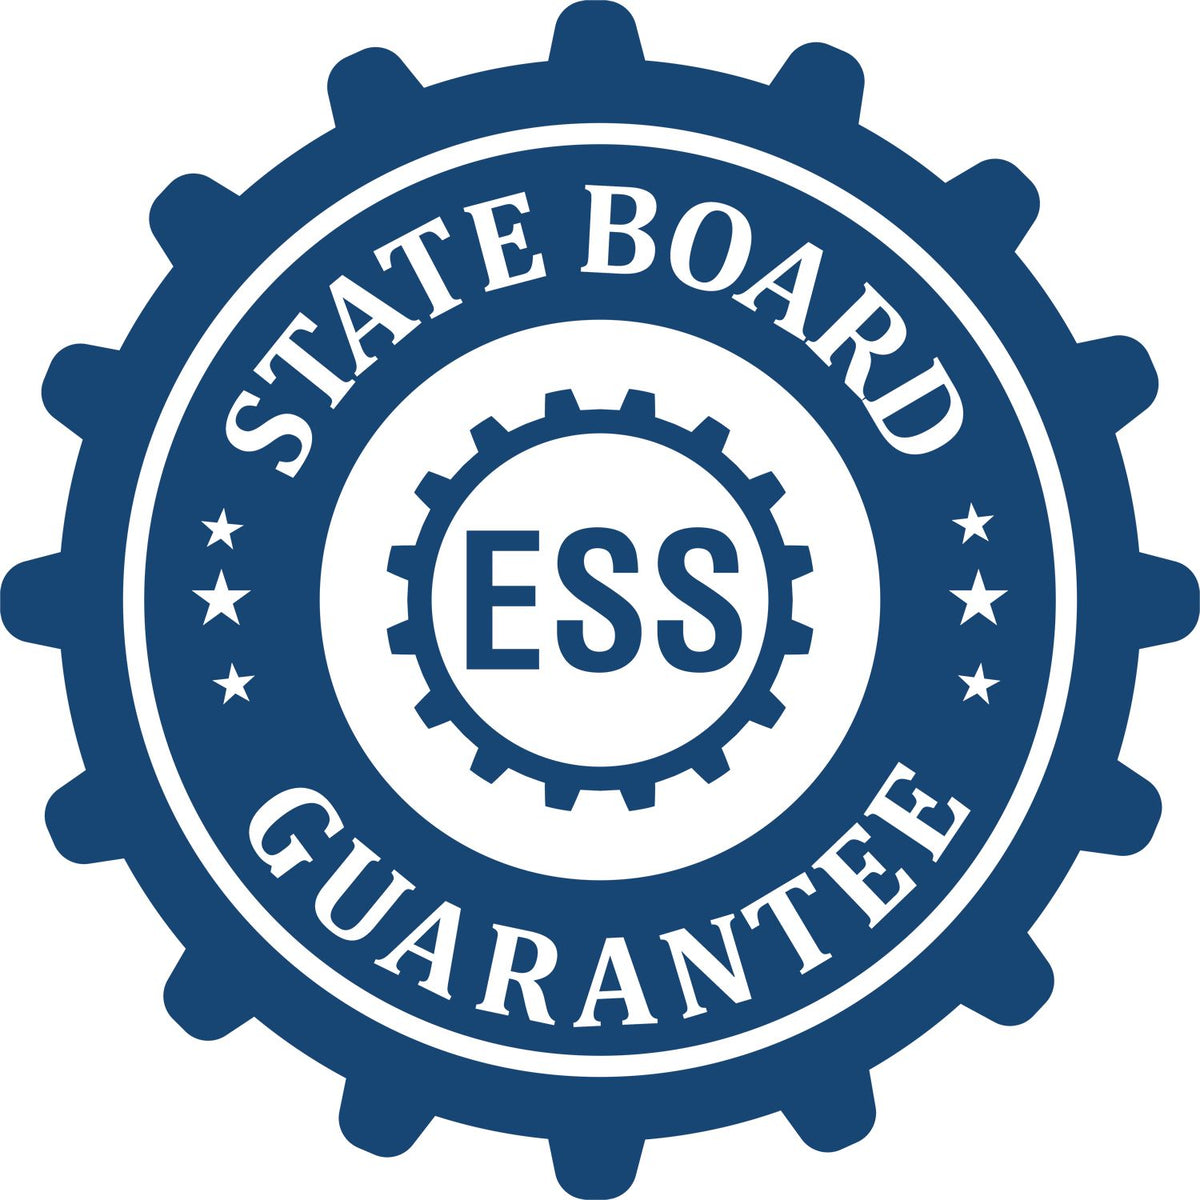 An emblem in a gear shape illustrating a state board guarantee for the Hybrid Massachusetts Landscape Architect Seal